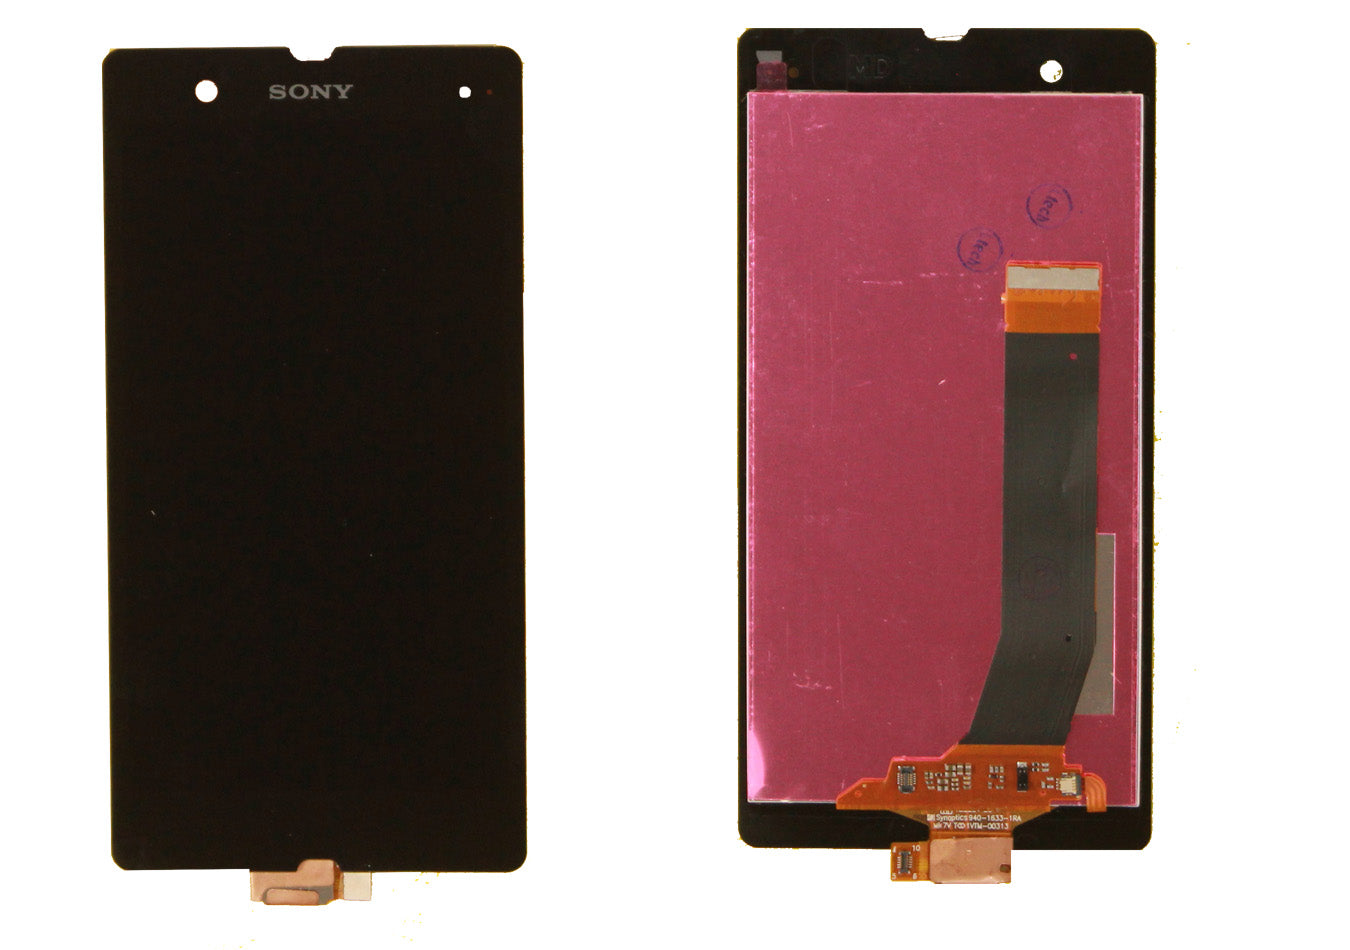 SXZ Xperia Z Screen Assembly (Without The Frame) (Refurbished) (Black)